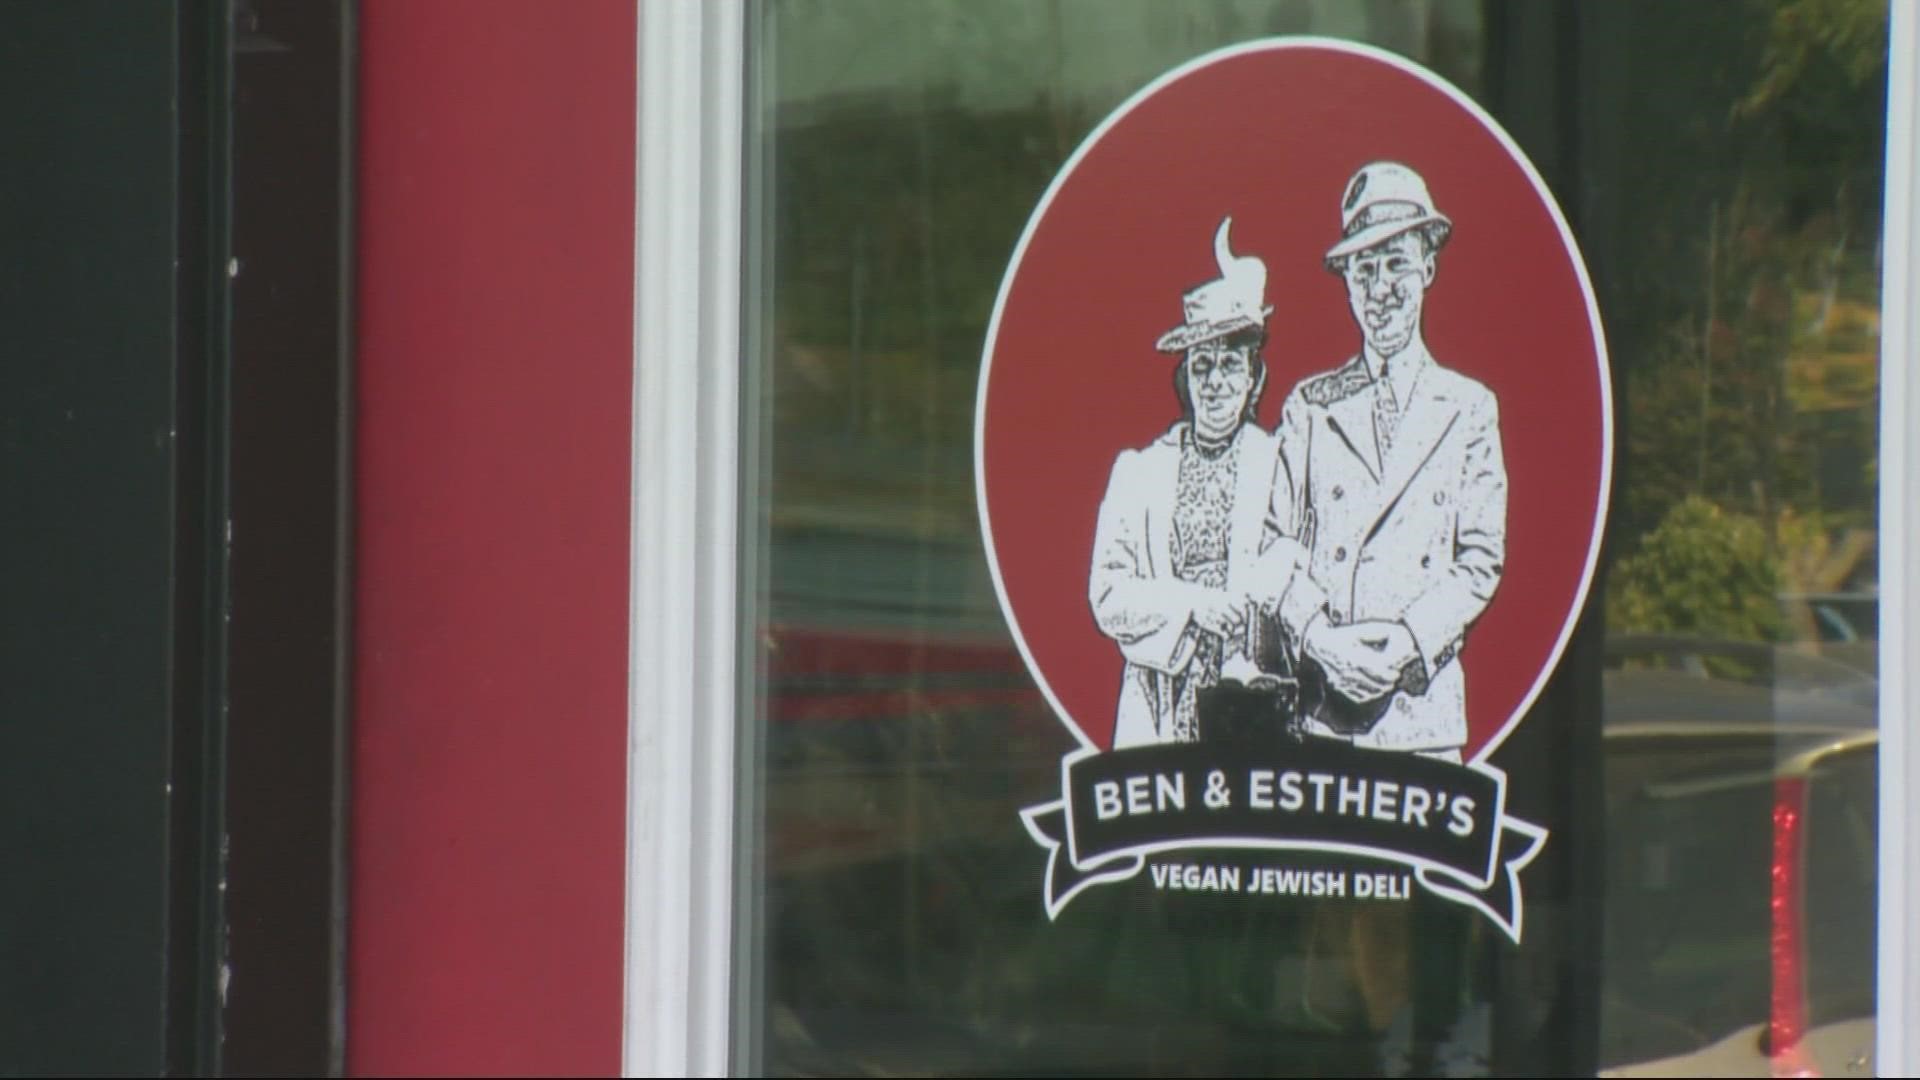 The owner of Ben and Esther's Vegan Jewish Deli said it's just the most recent incident targeting the Jewish-owned business.